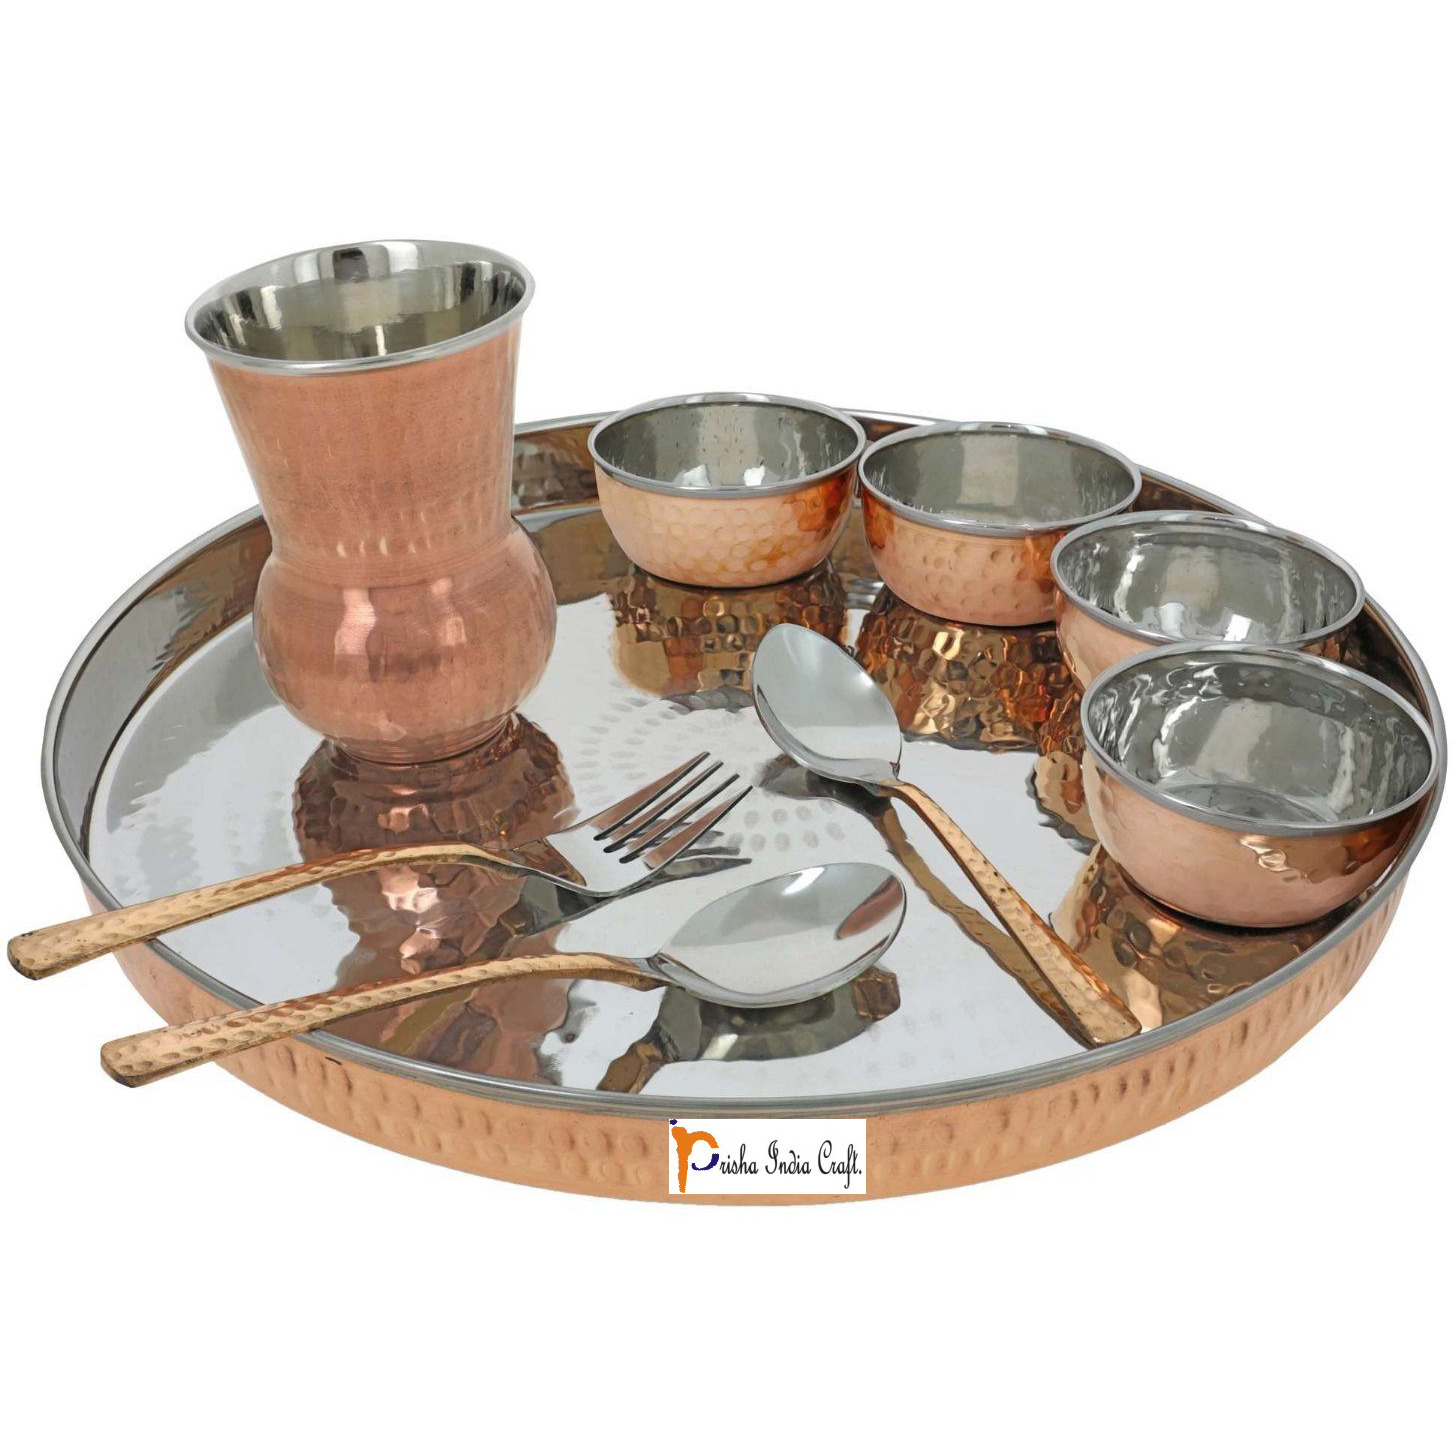 Prisha India Craft B. Set of 5 Dinnerware Traditional Stainless Steel Copper Dinner Set of Thali Plate, Bowls, Glass and Spoons, Dia 13  With 1 Luxury Style Pitcher Jug - Christmas Gift